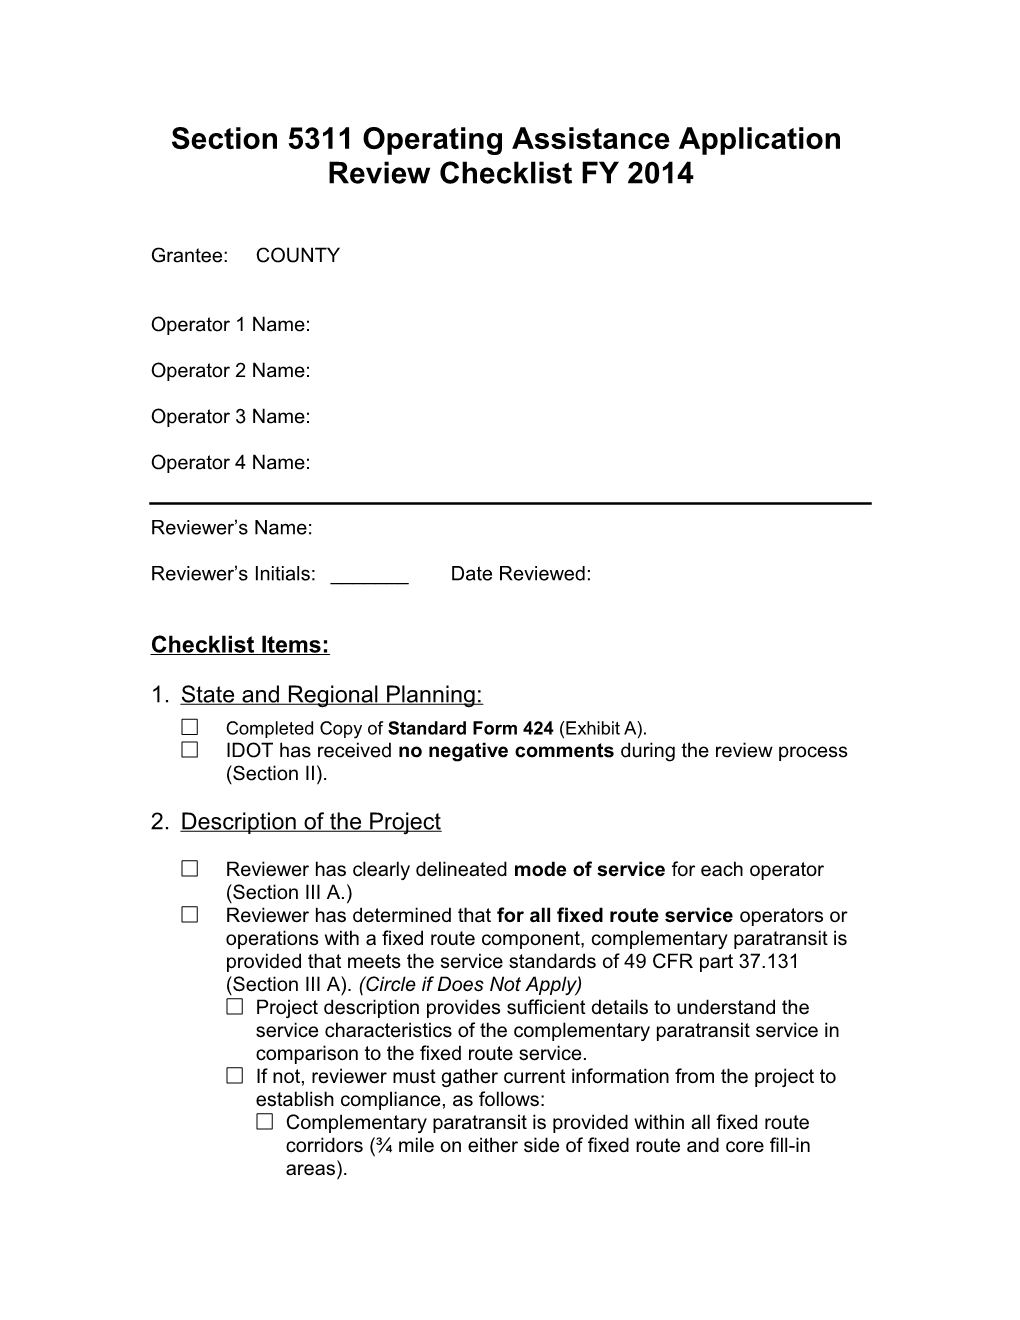 Section 5311 Operating Assistance Application Review Checklist FY 2003